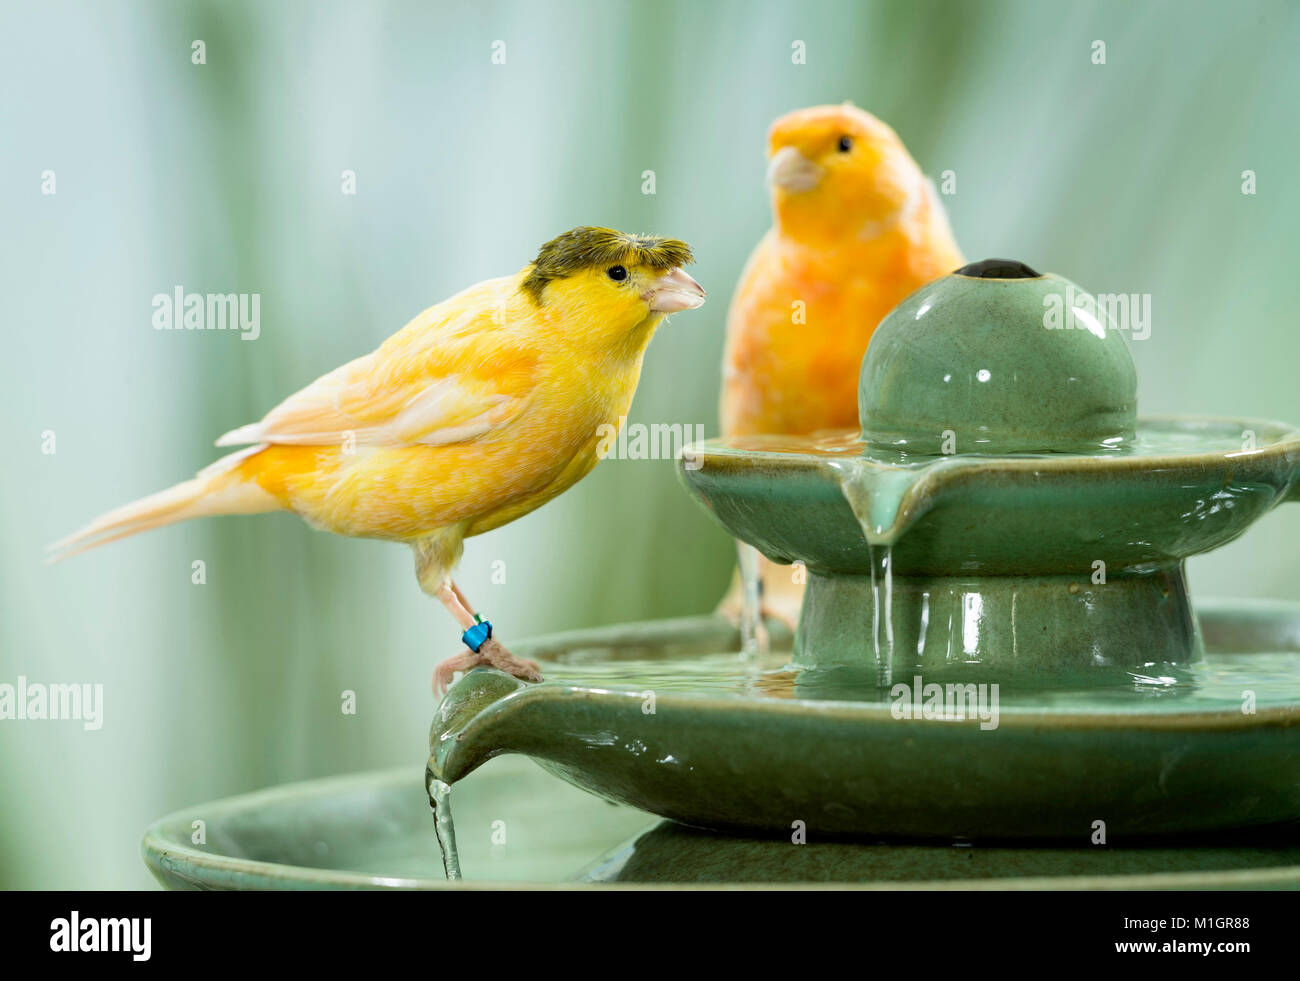 Domestic Canary. Orange and crested bird on indoor fountain. Germany Stock Photo